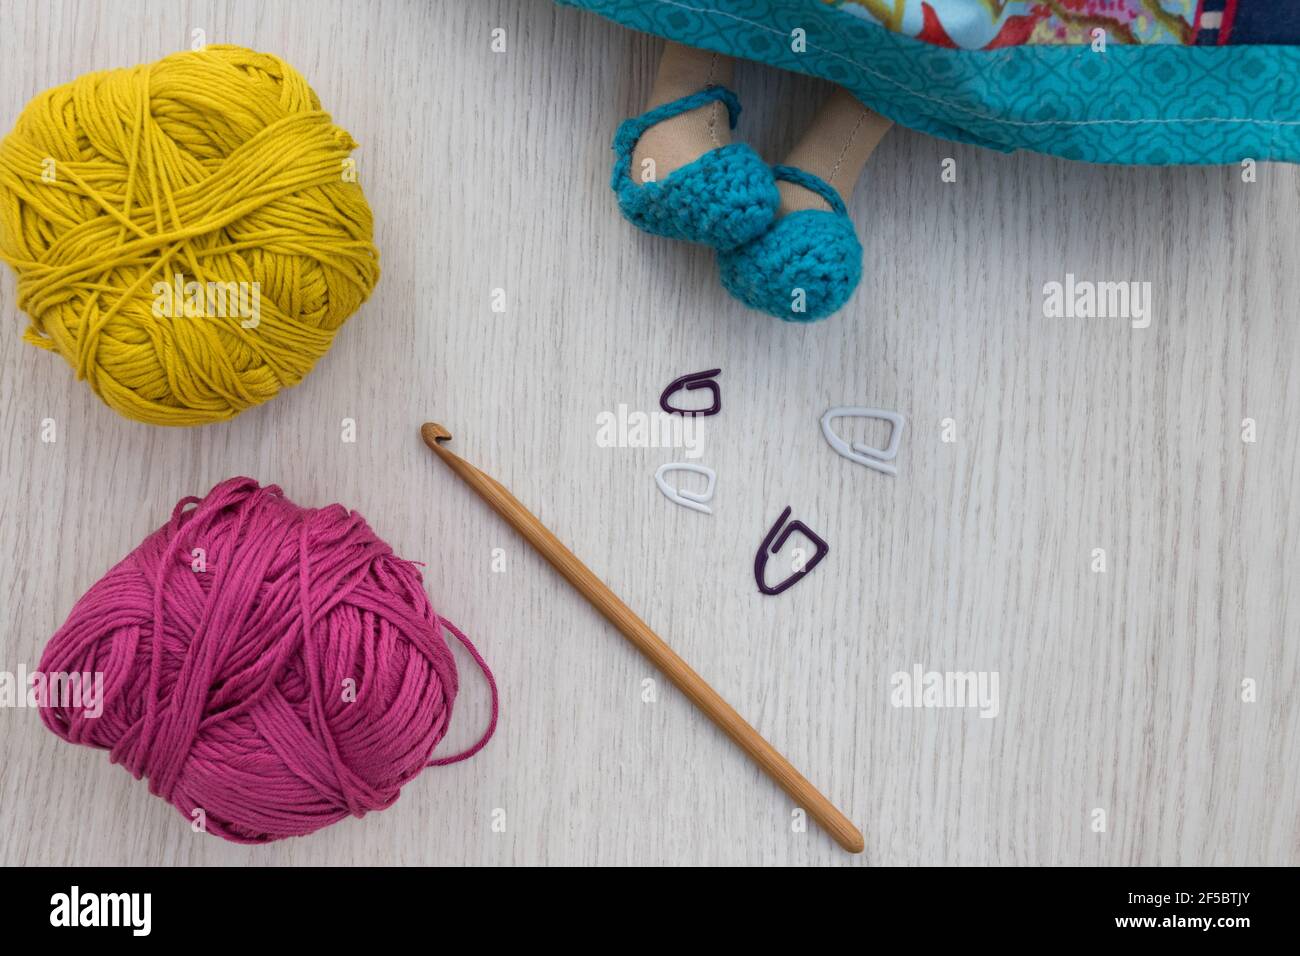 Four clips, a brown sewing needle and two yarn balls next to the lower part of a handcrafted multicolor doll. Stock Photo